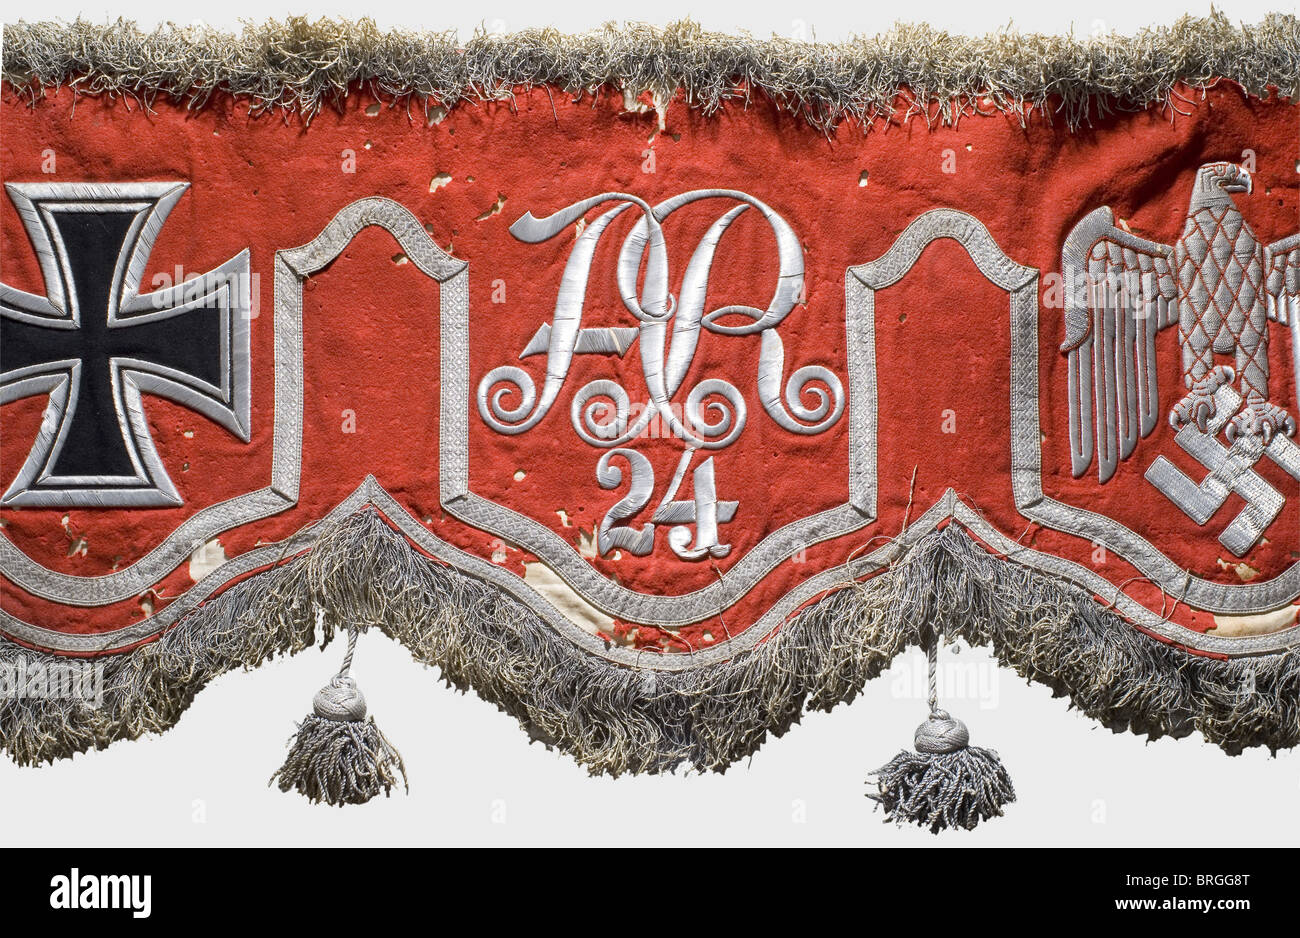 A model 1937 drum banner for the right kettle drum,of the 24th Artillery Regiment Red cloth with thick silver fringe above and below.The five fields are separated by silver lace,and embroidered in silver.Two bear the Wehrmacht eagle,two the iron cross,and one the regimental cipher 'AR 24'.(The left drum cloth would start with the iron cross.)Field grey lining on the back.Heavy moth damage,some fastening loops missing.The 24th Artillery Regiment was established in 1935 in Altenburg and assigned to the 24th Infantry Division.It participated in the fig,Additional-Rights-Clearences-Not Available Stock Photo